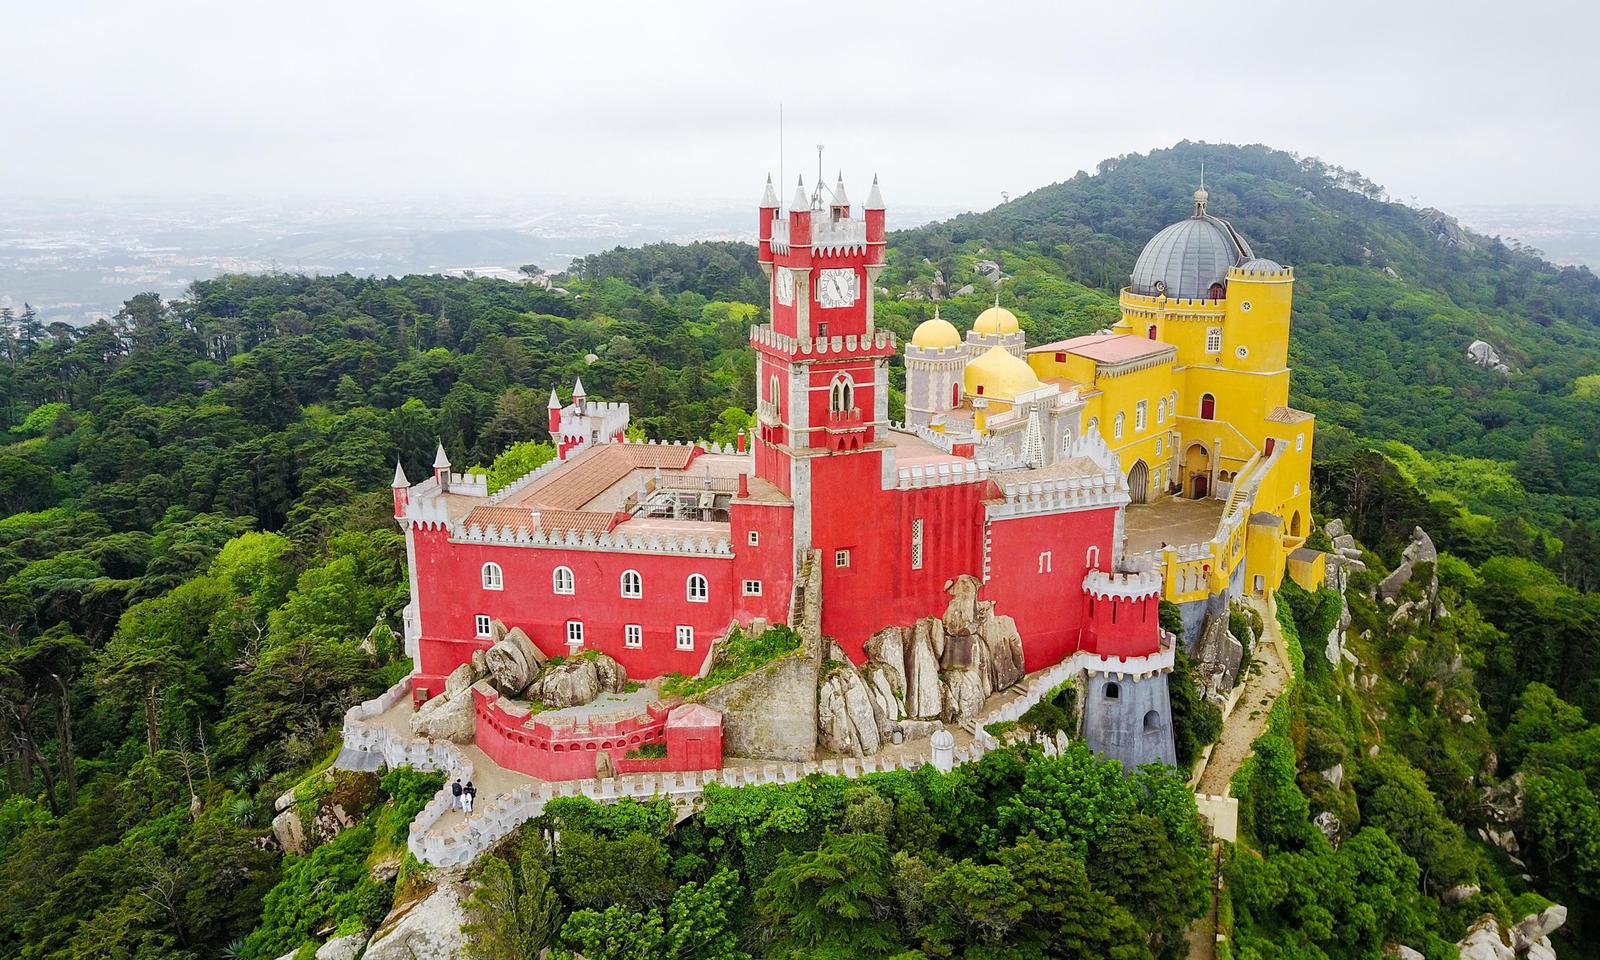 Famous Castles Quiz National Palace of Pena, Sintra, Portugal